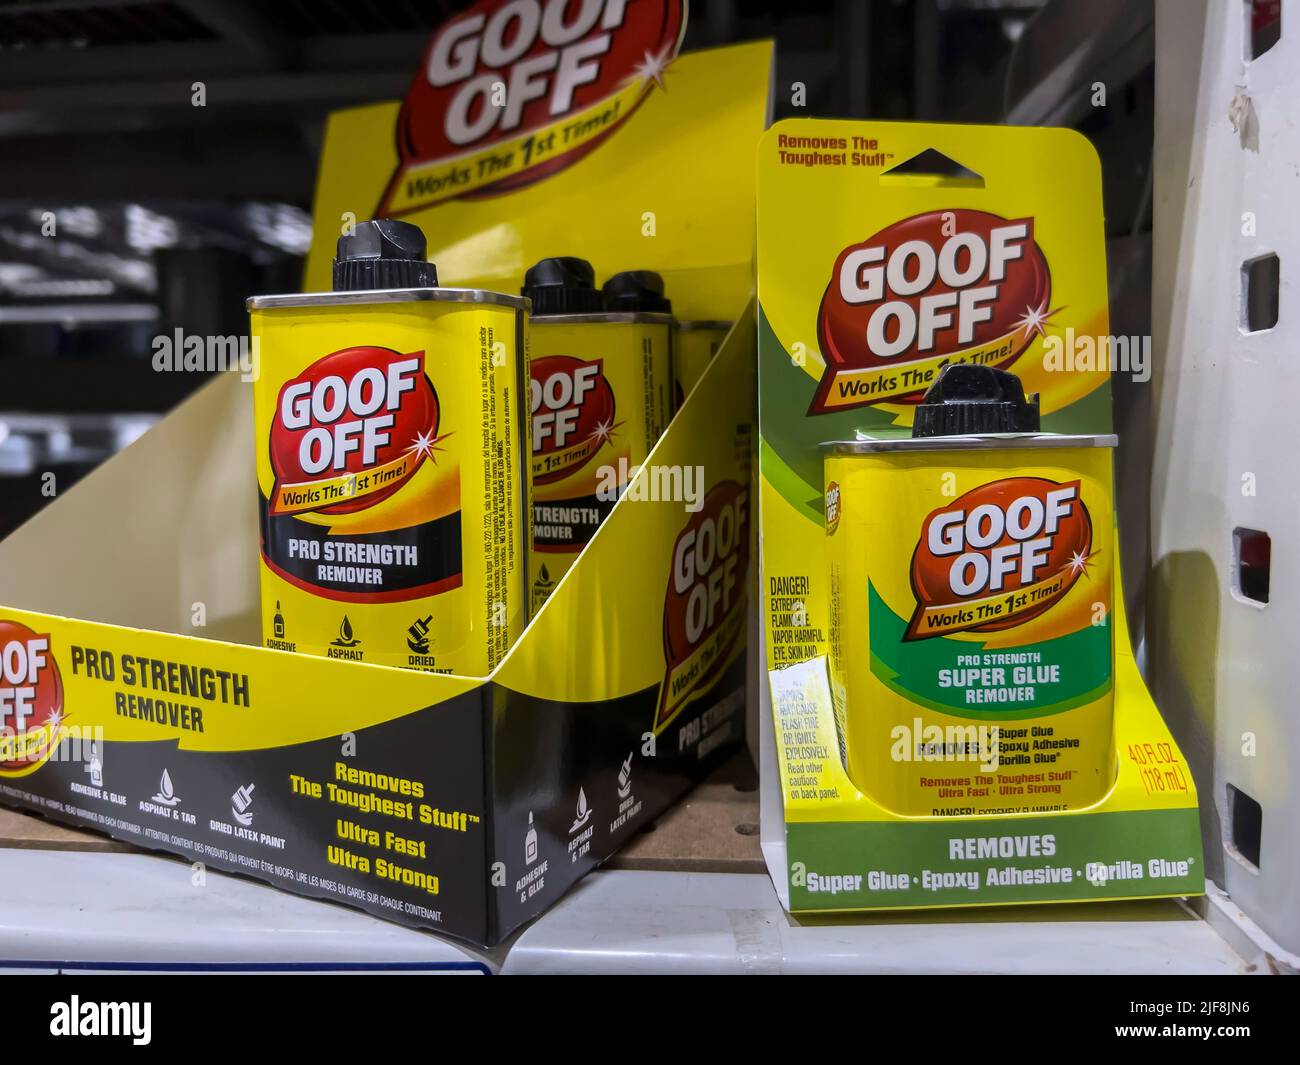 Seattle, WA USA - circa June 2022: Close up view of Goof Off products for sale inside a Lowe's home improvement store. Stock Photo